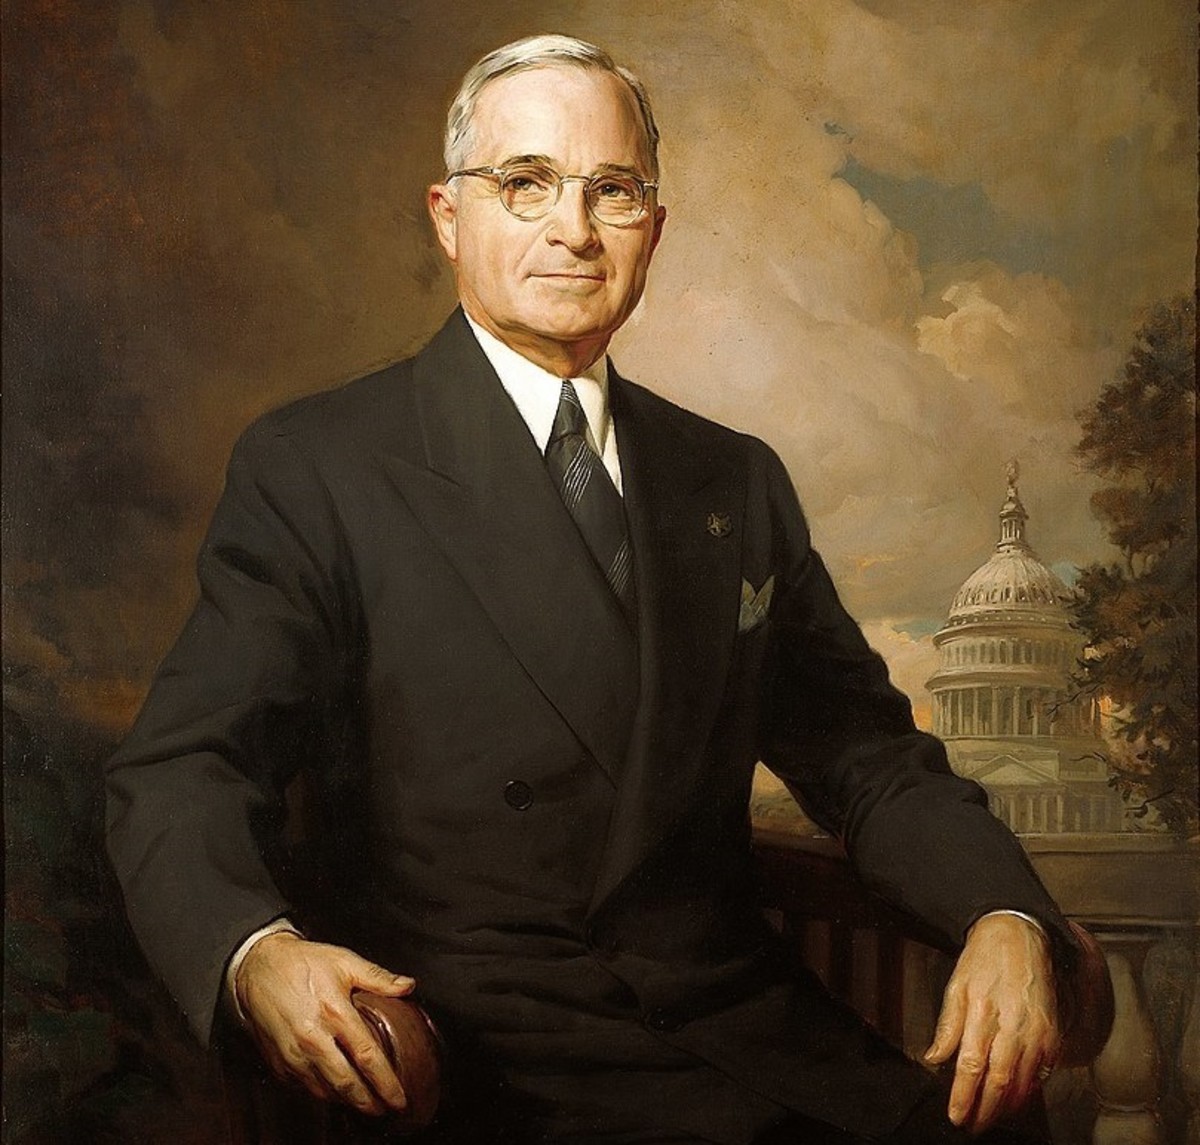 Was Harry Truman the Worst President in US History?